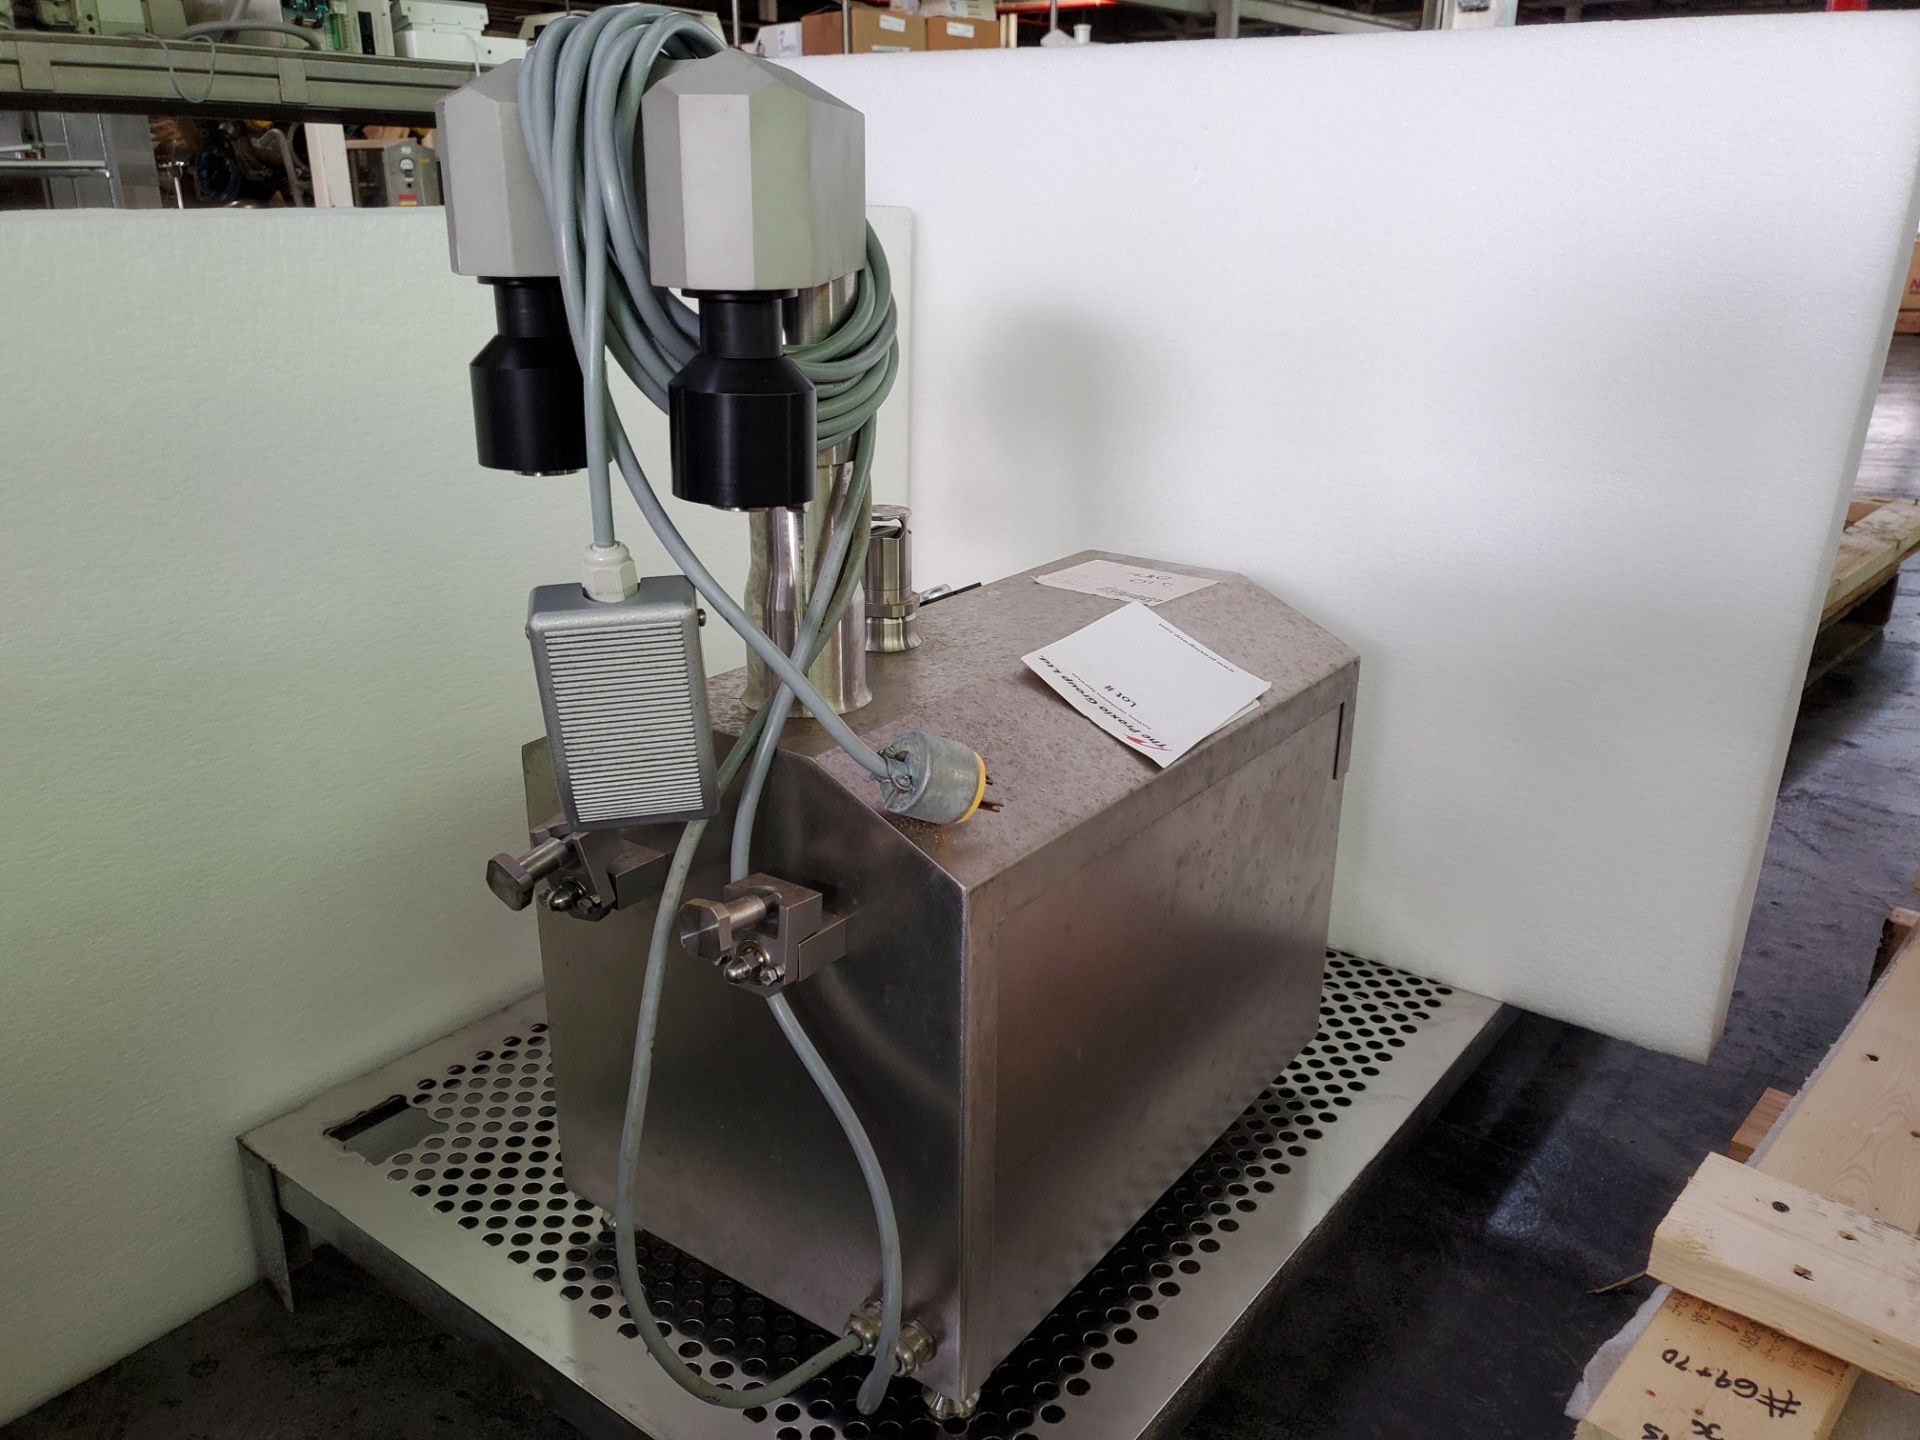 Bausch & Strobel Filling Maching, type CN EDM 3295, semi-automatic operation with foot pedal, single